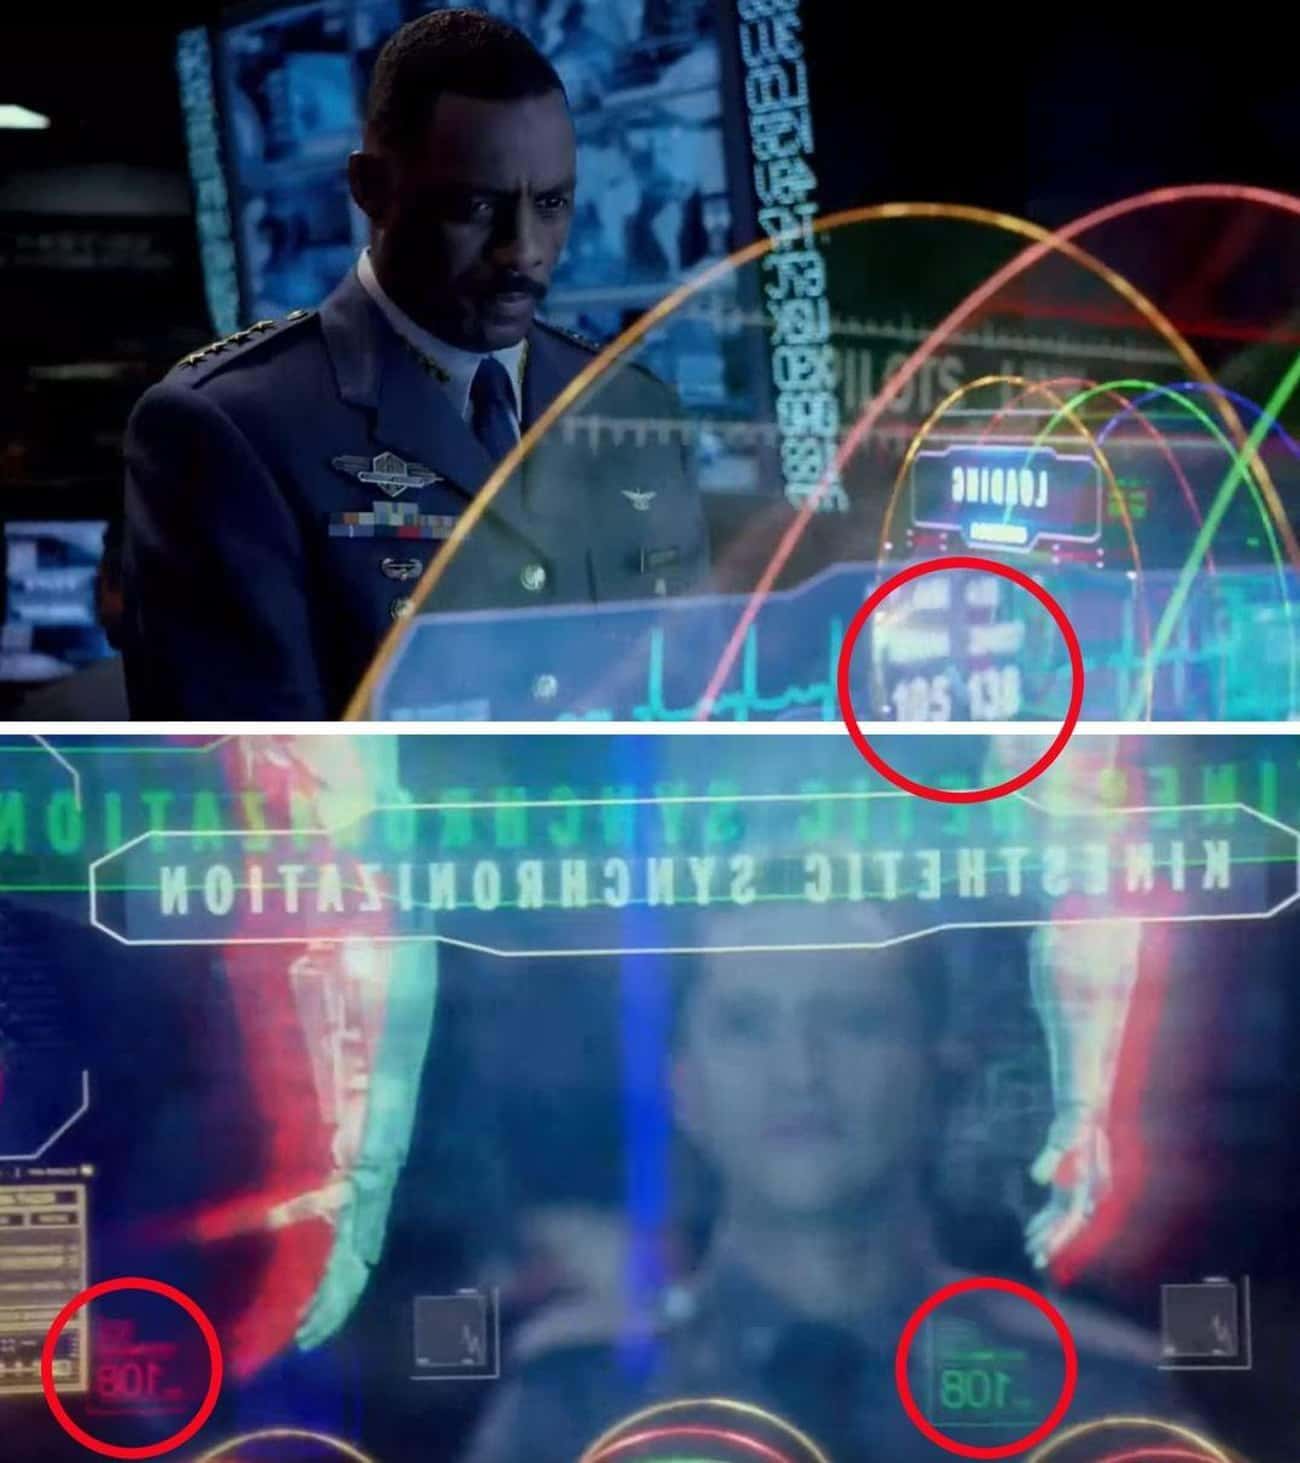 The Jaeger's Pilots' Heart Rates Synch In 'Pacific Rim' Following The Neural Handshake